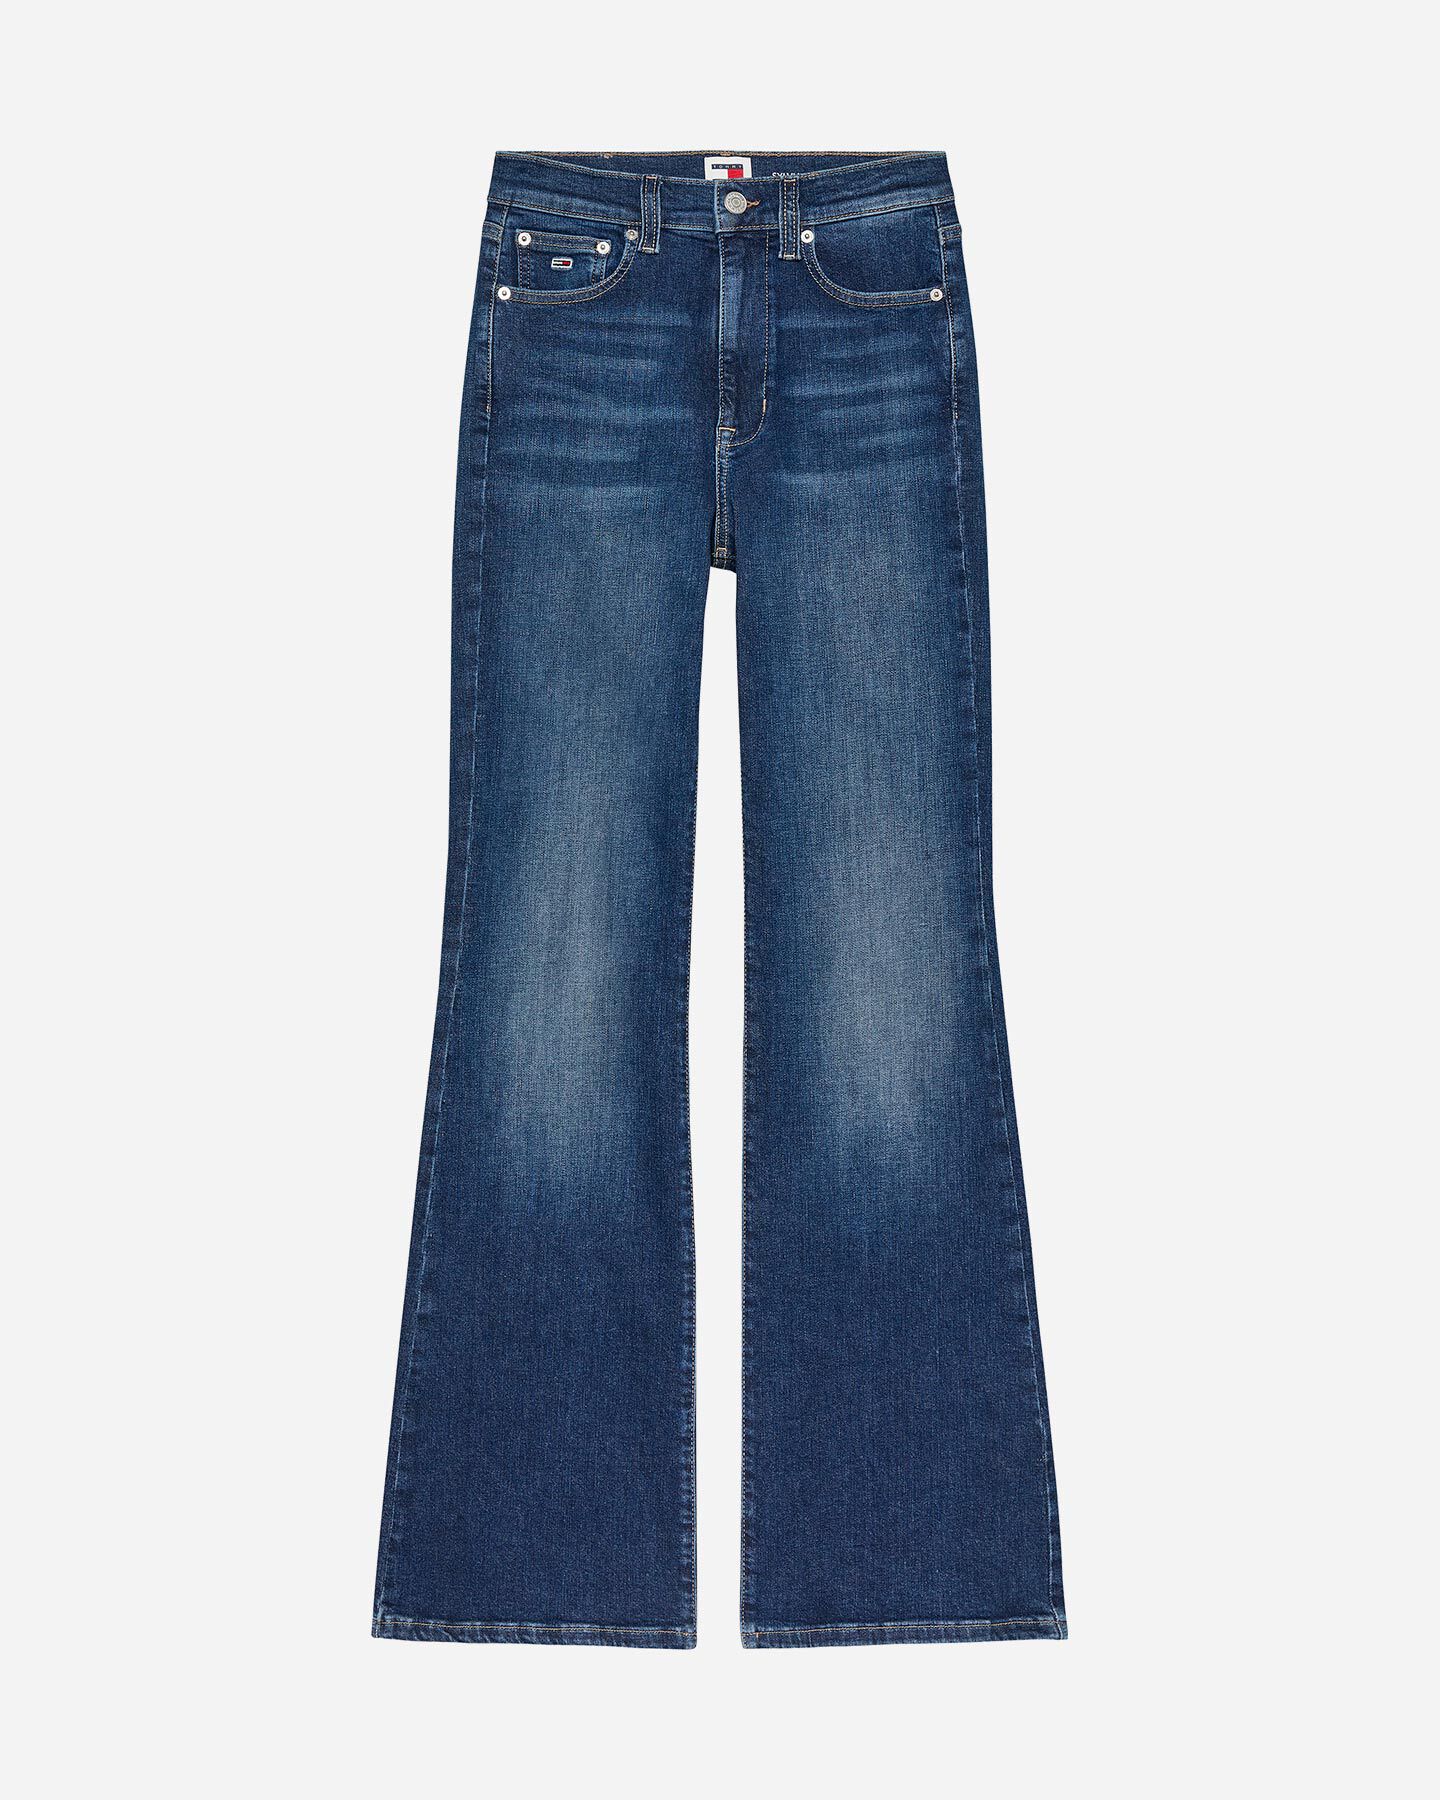  Jeans TOMMY HILFIGER SYLVIA L32 BOOTCUT W S5686211|UNI|32/26 scatto 0